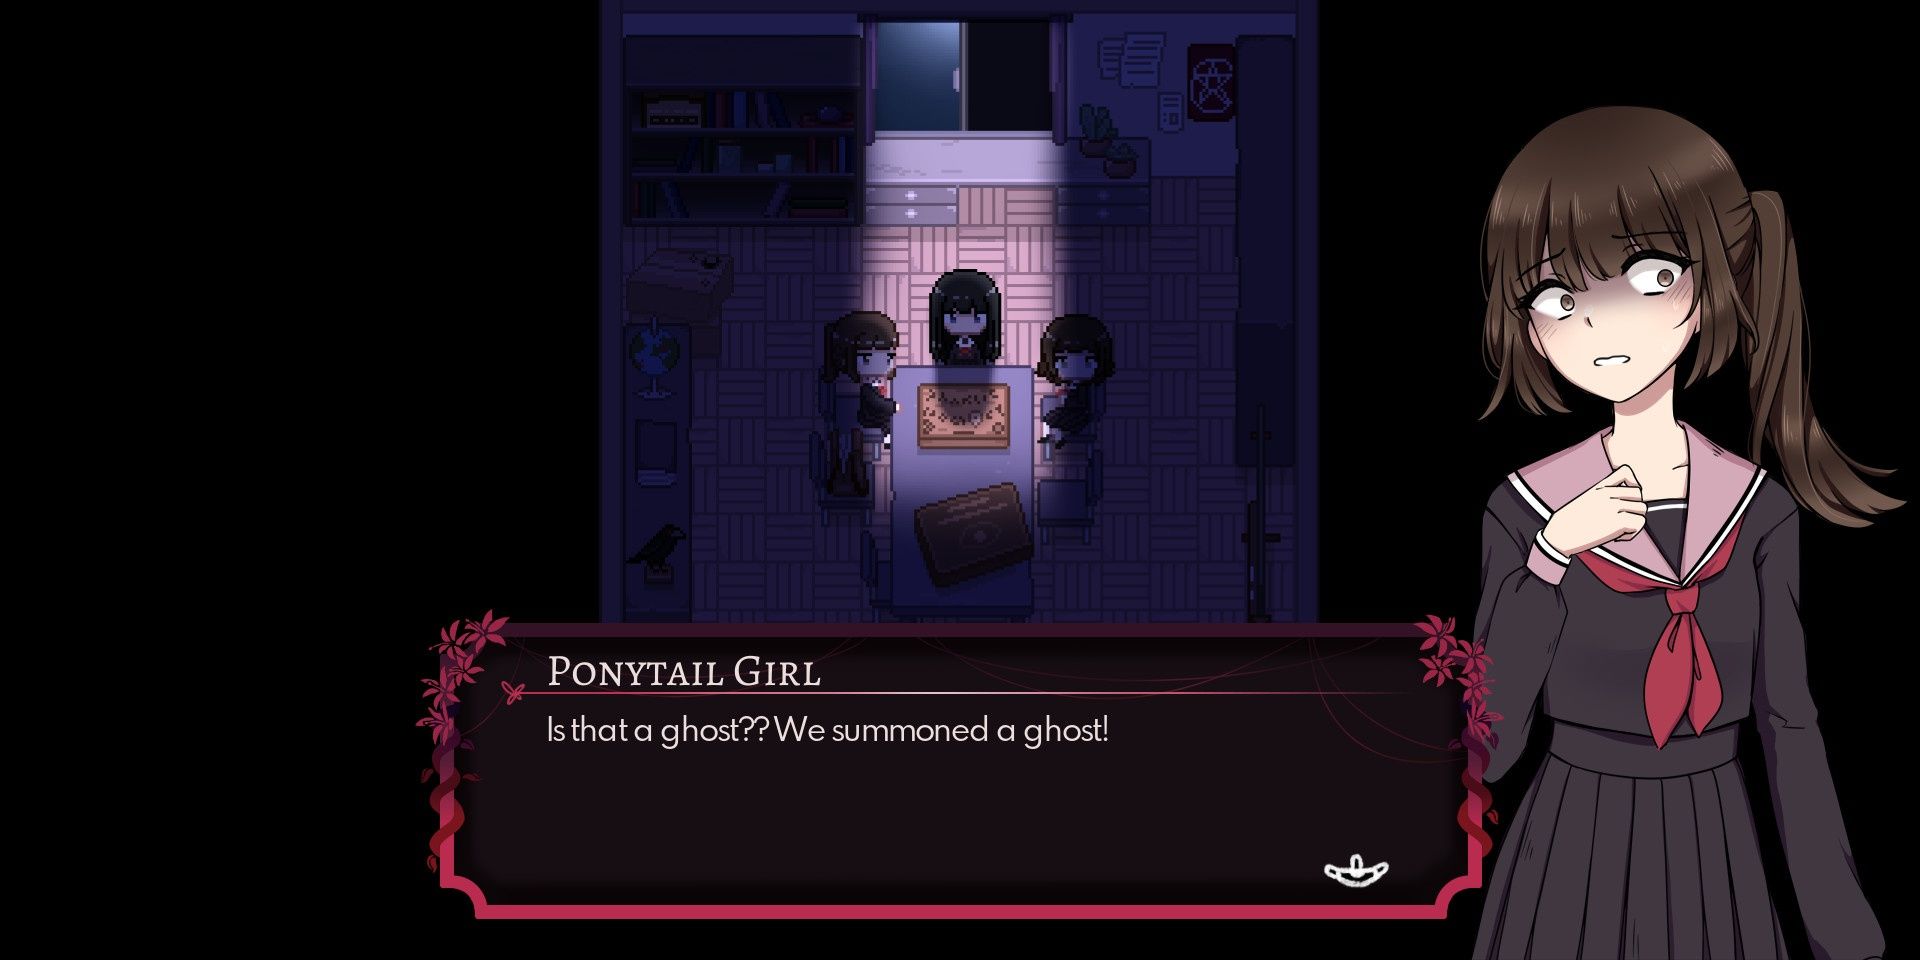 Ponytail Girl worried about ghosts in Project Kat